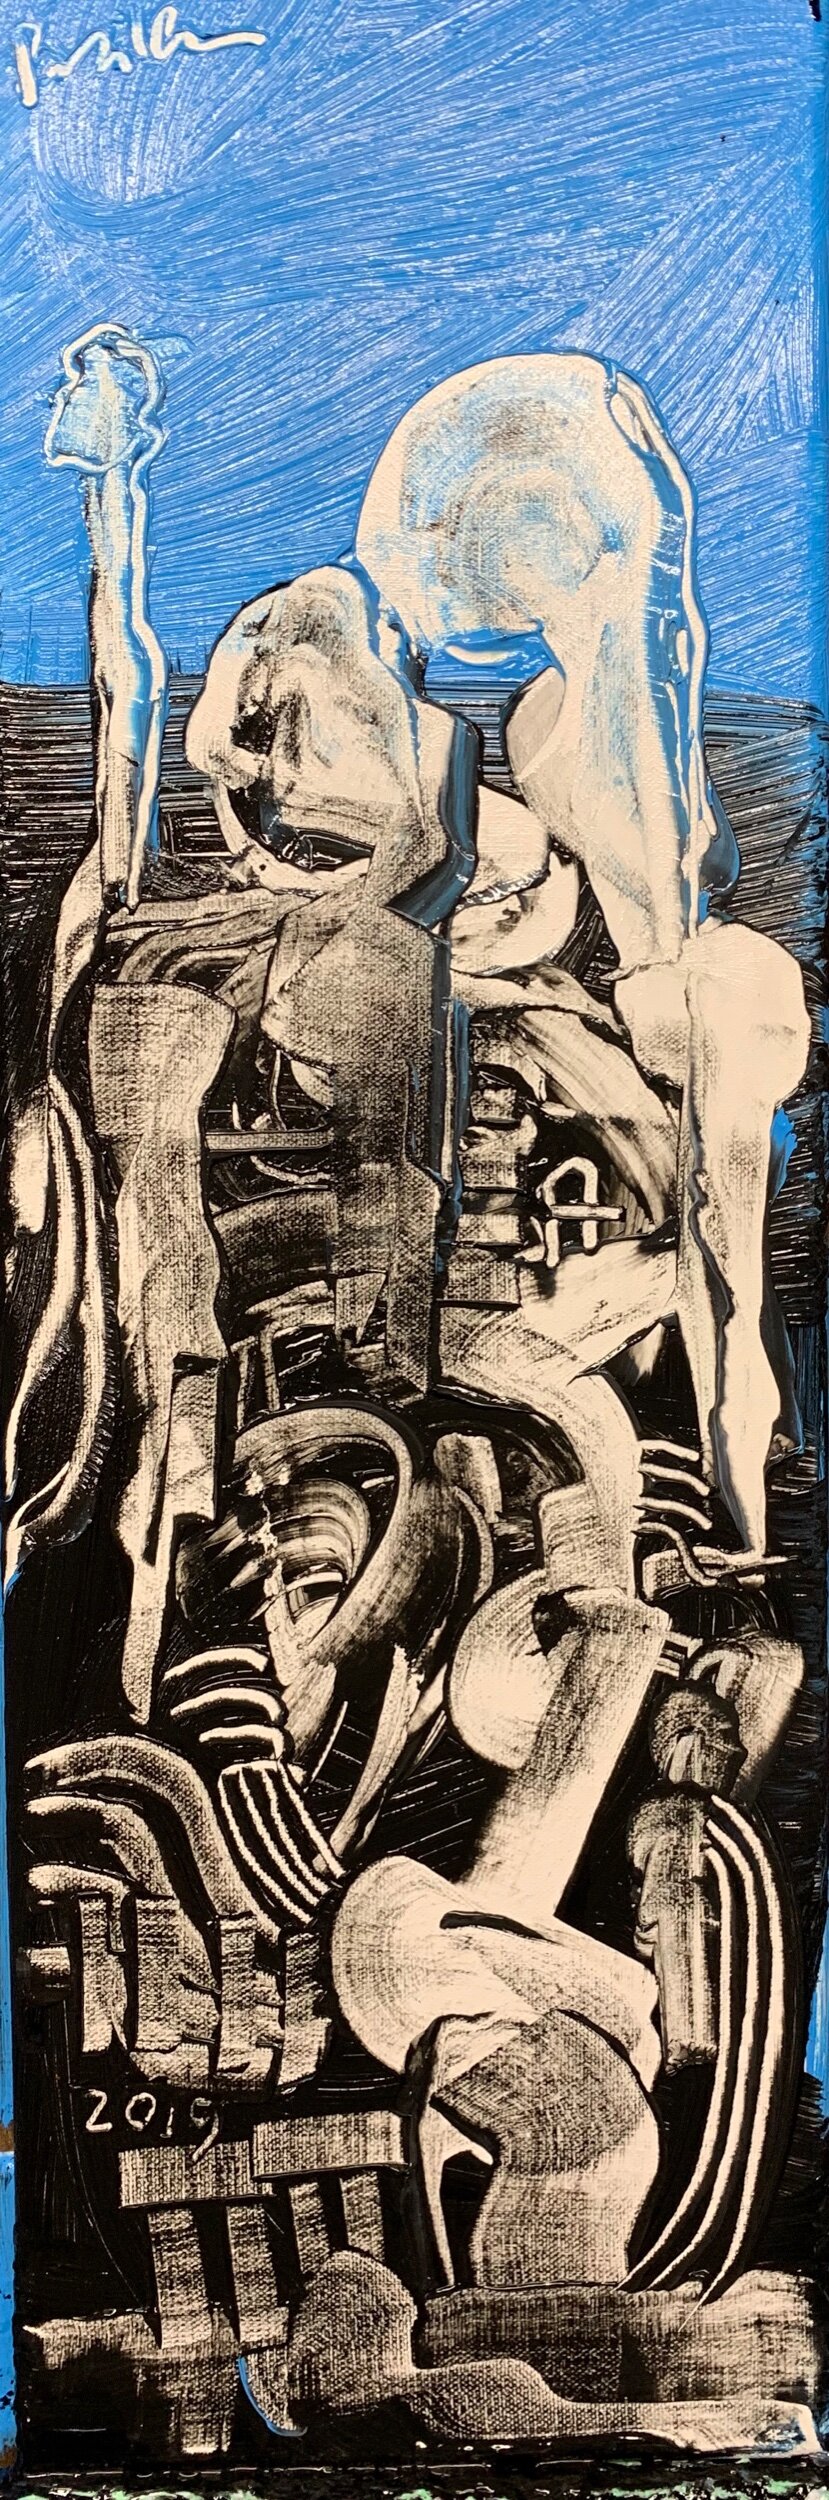 "Leaning Woman" 2019 Acrylic on canvas 24"x8"